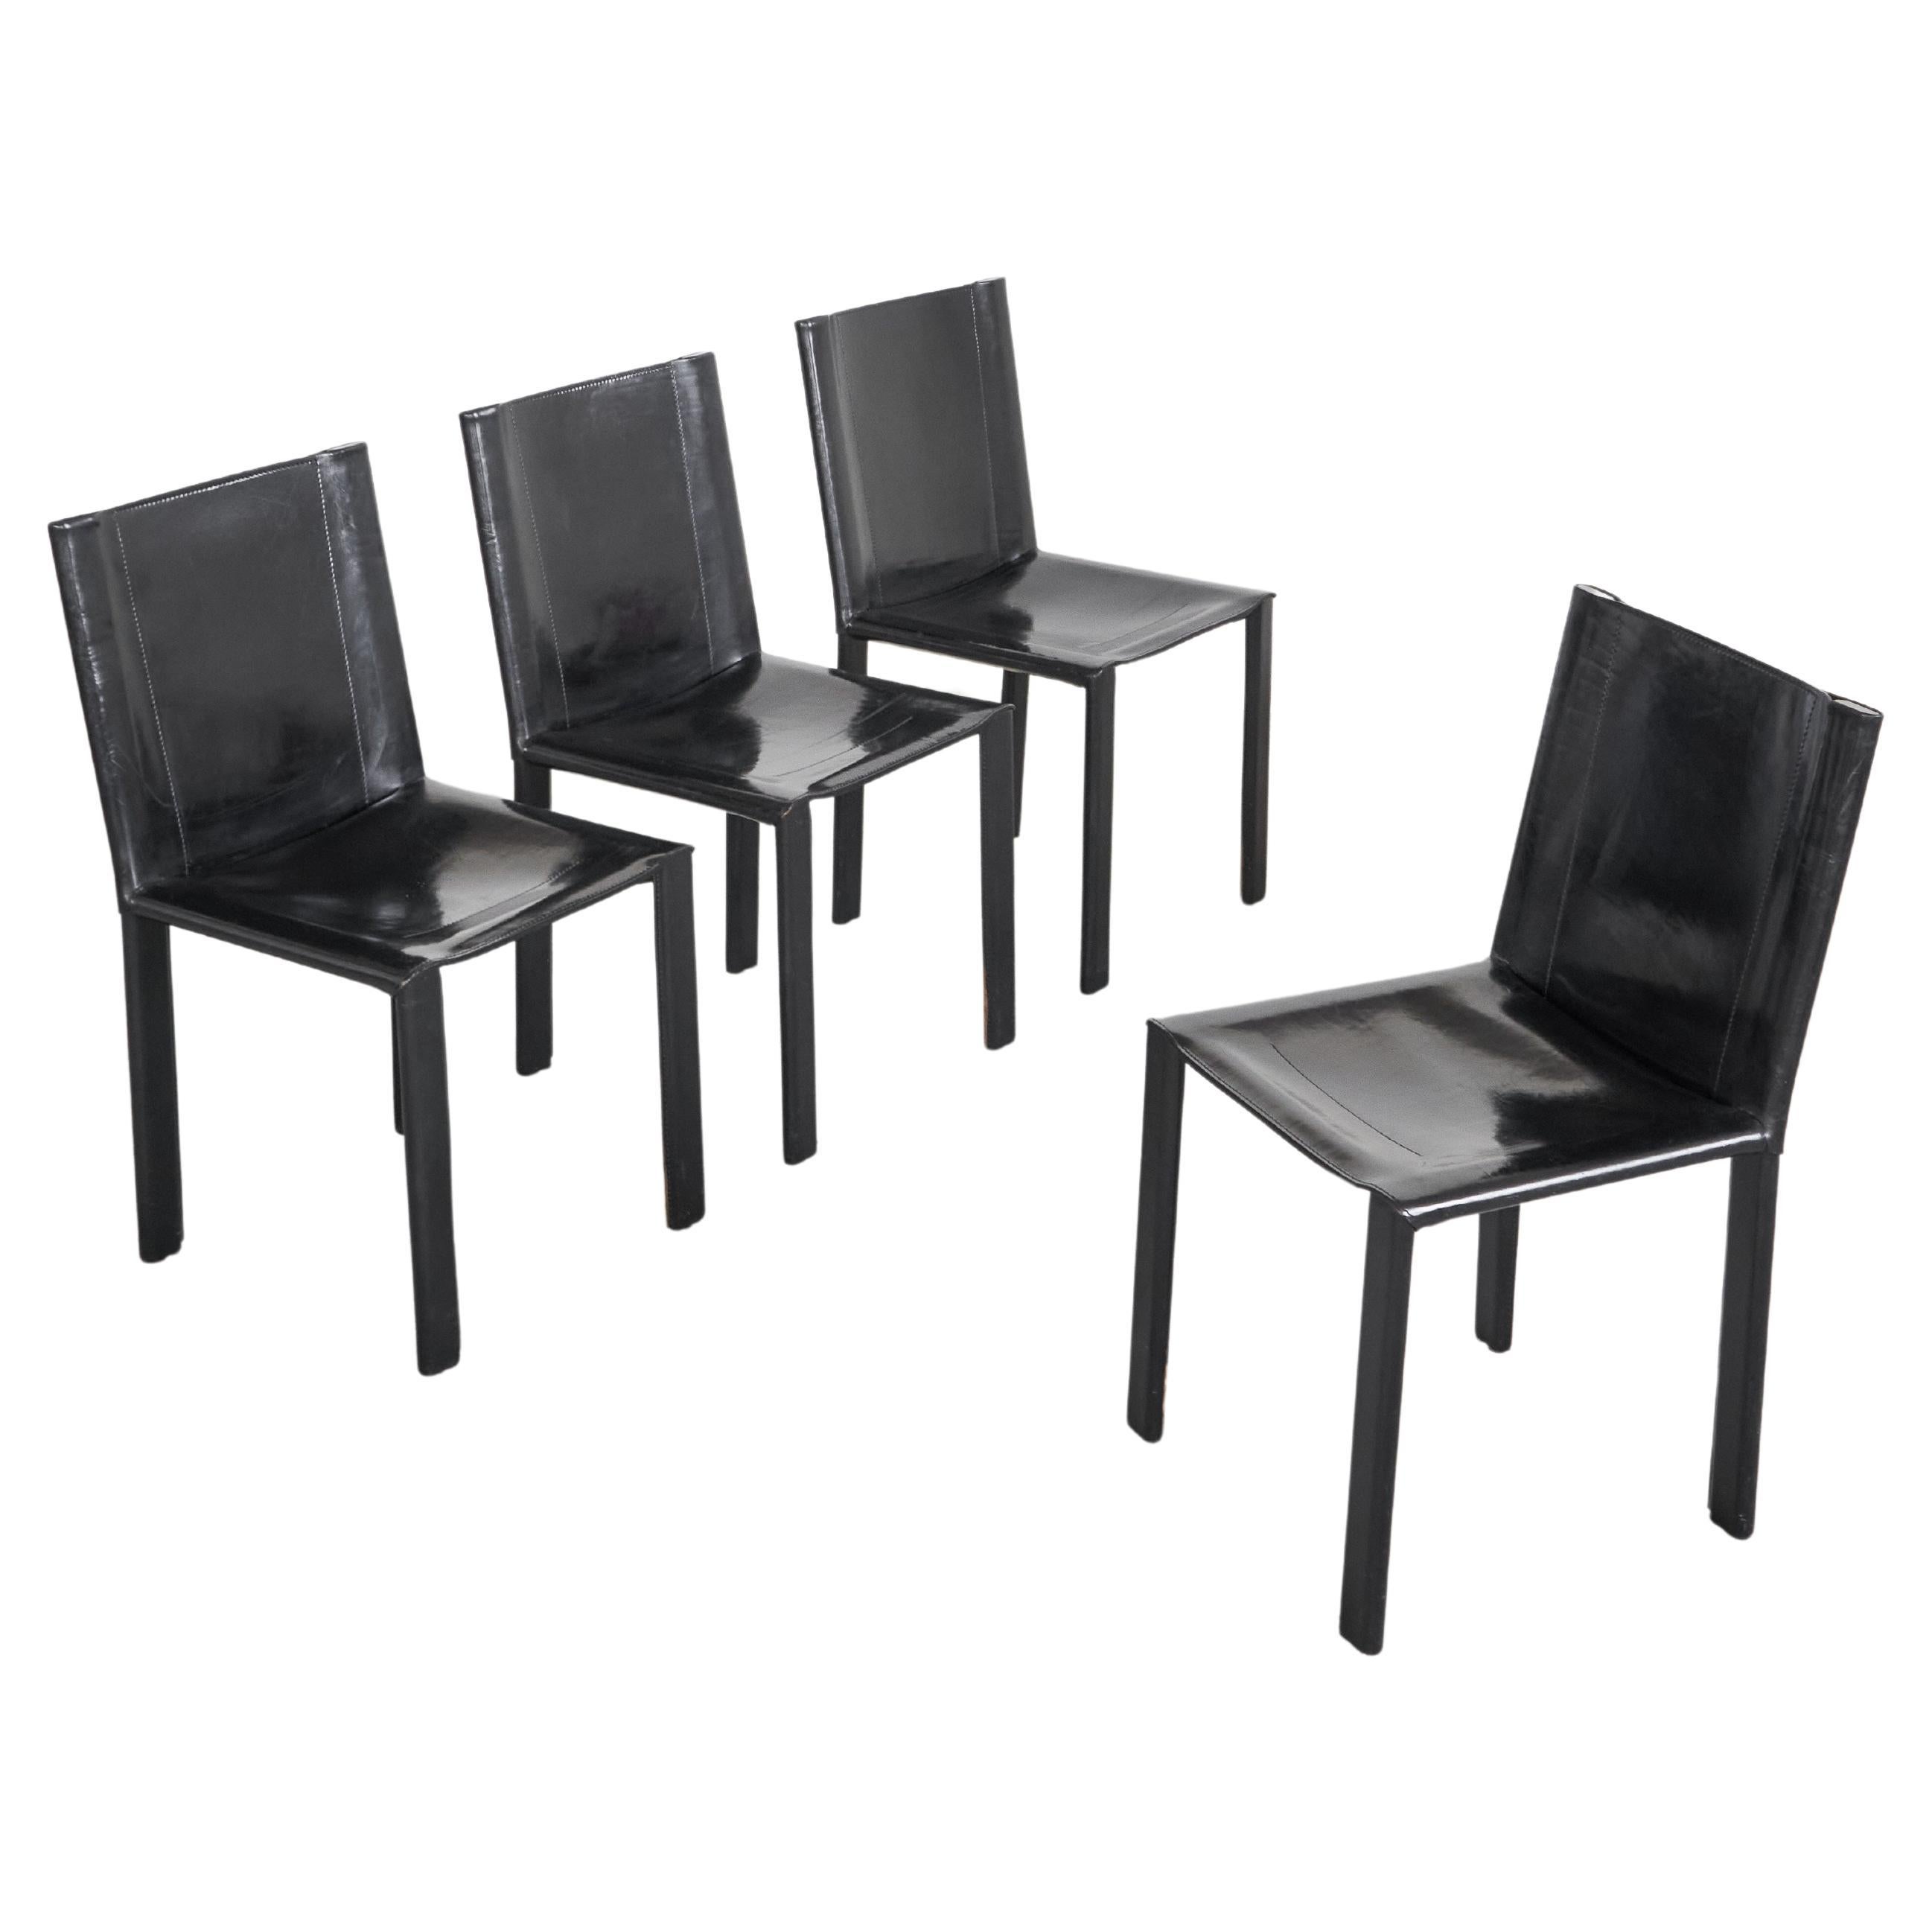 Set of 4 Black Leather Chairs by Matteo Grassi, Italy, 1990s For Sale